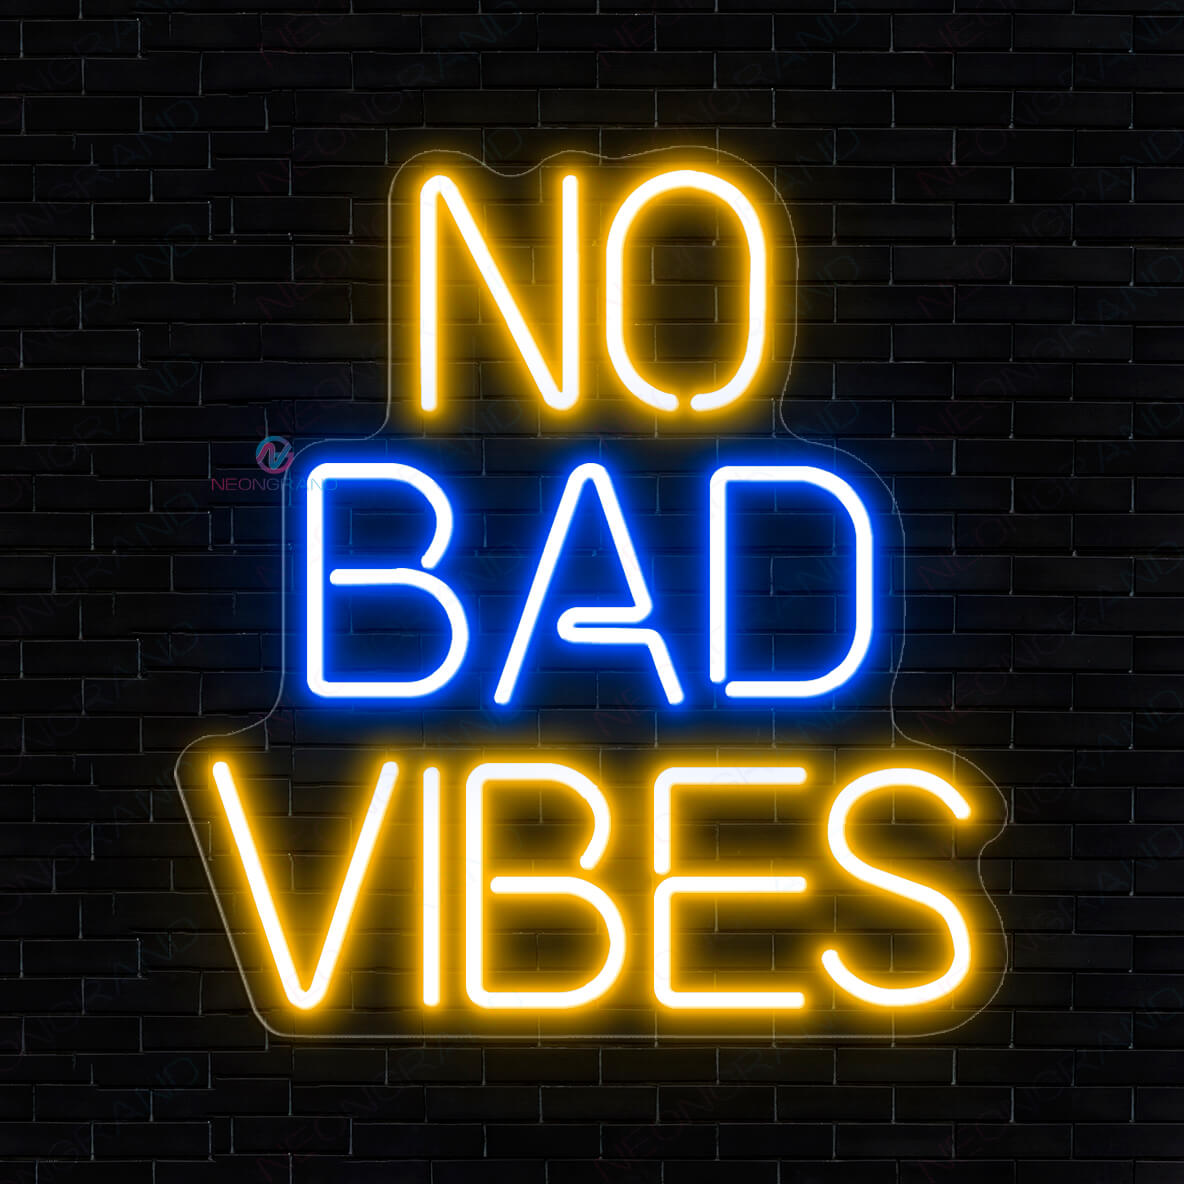 No Bad Vibes Neon Sign Party Led Light orange yellow